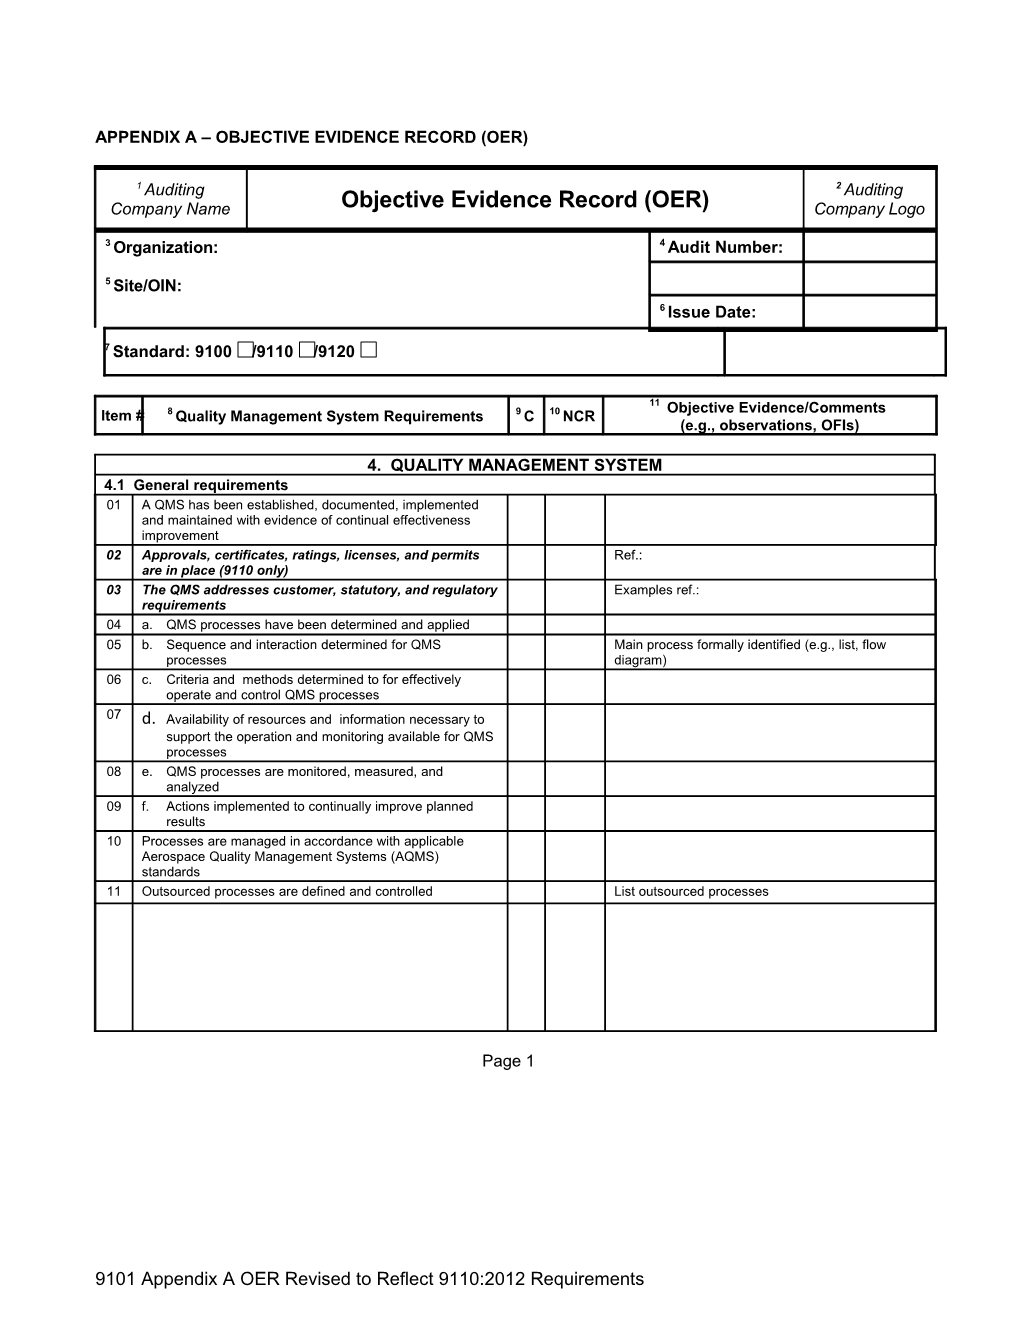 APPENDIX a Objective Evidence Record (OER)